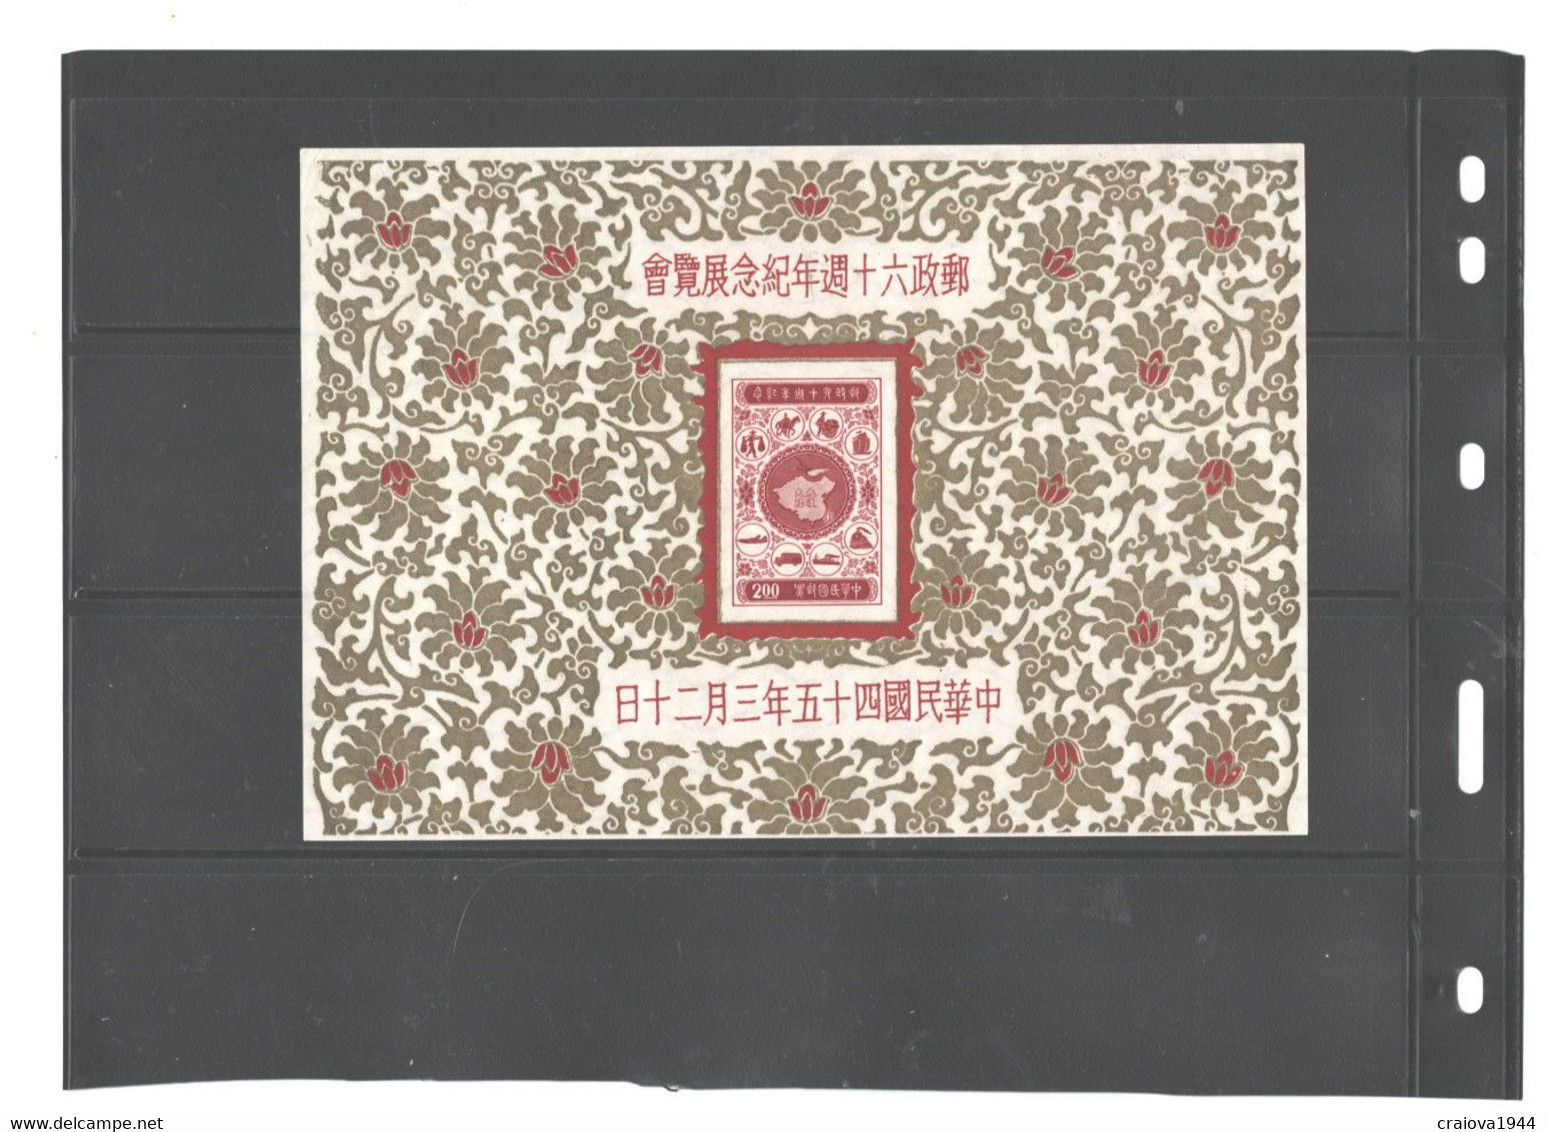 REPUBLIC OF CHINA 1956 MS#1136 MNH NO GUM AS ISSUED - Neufs